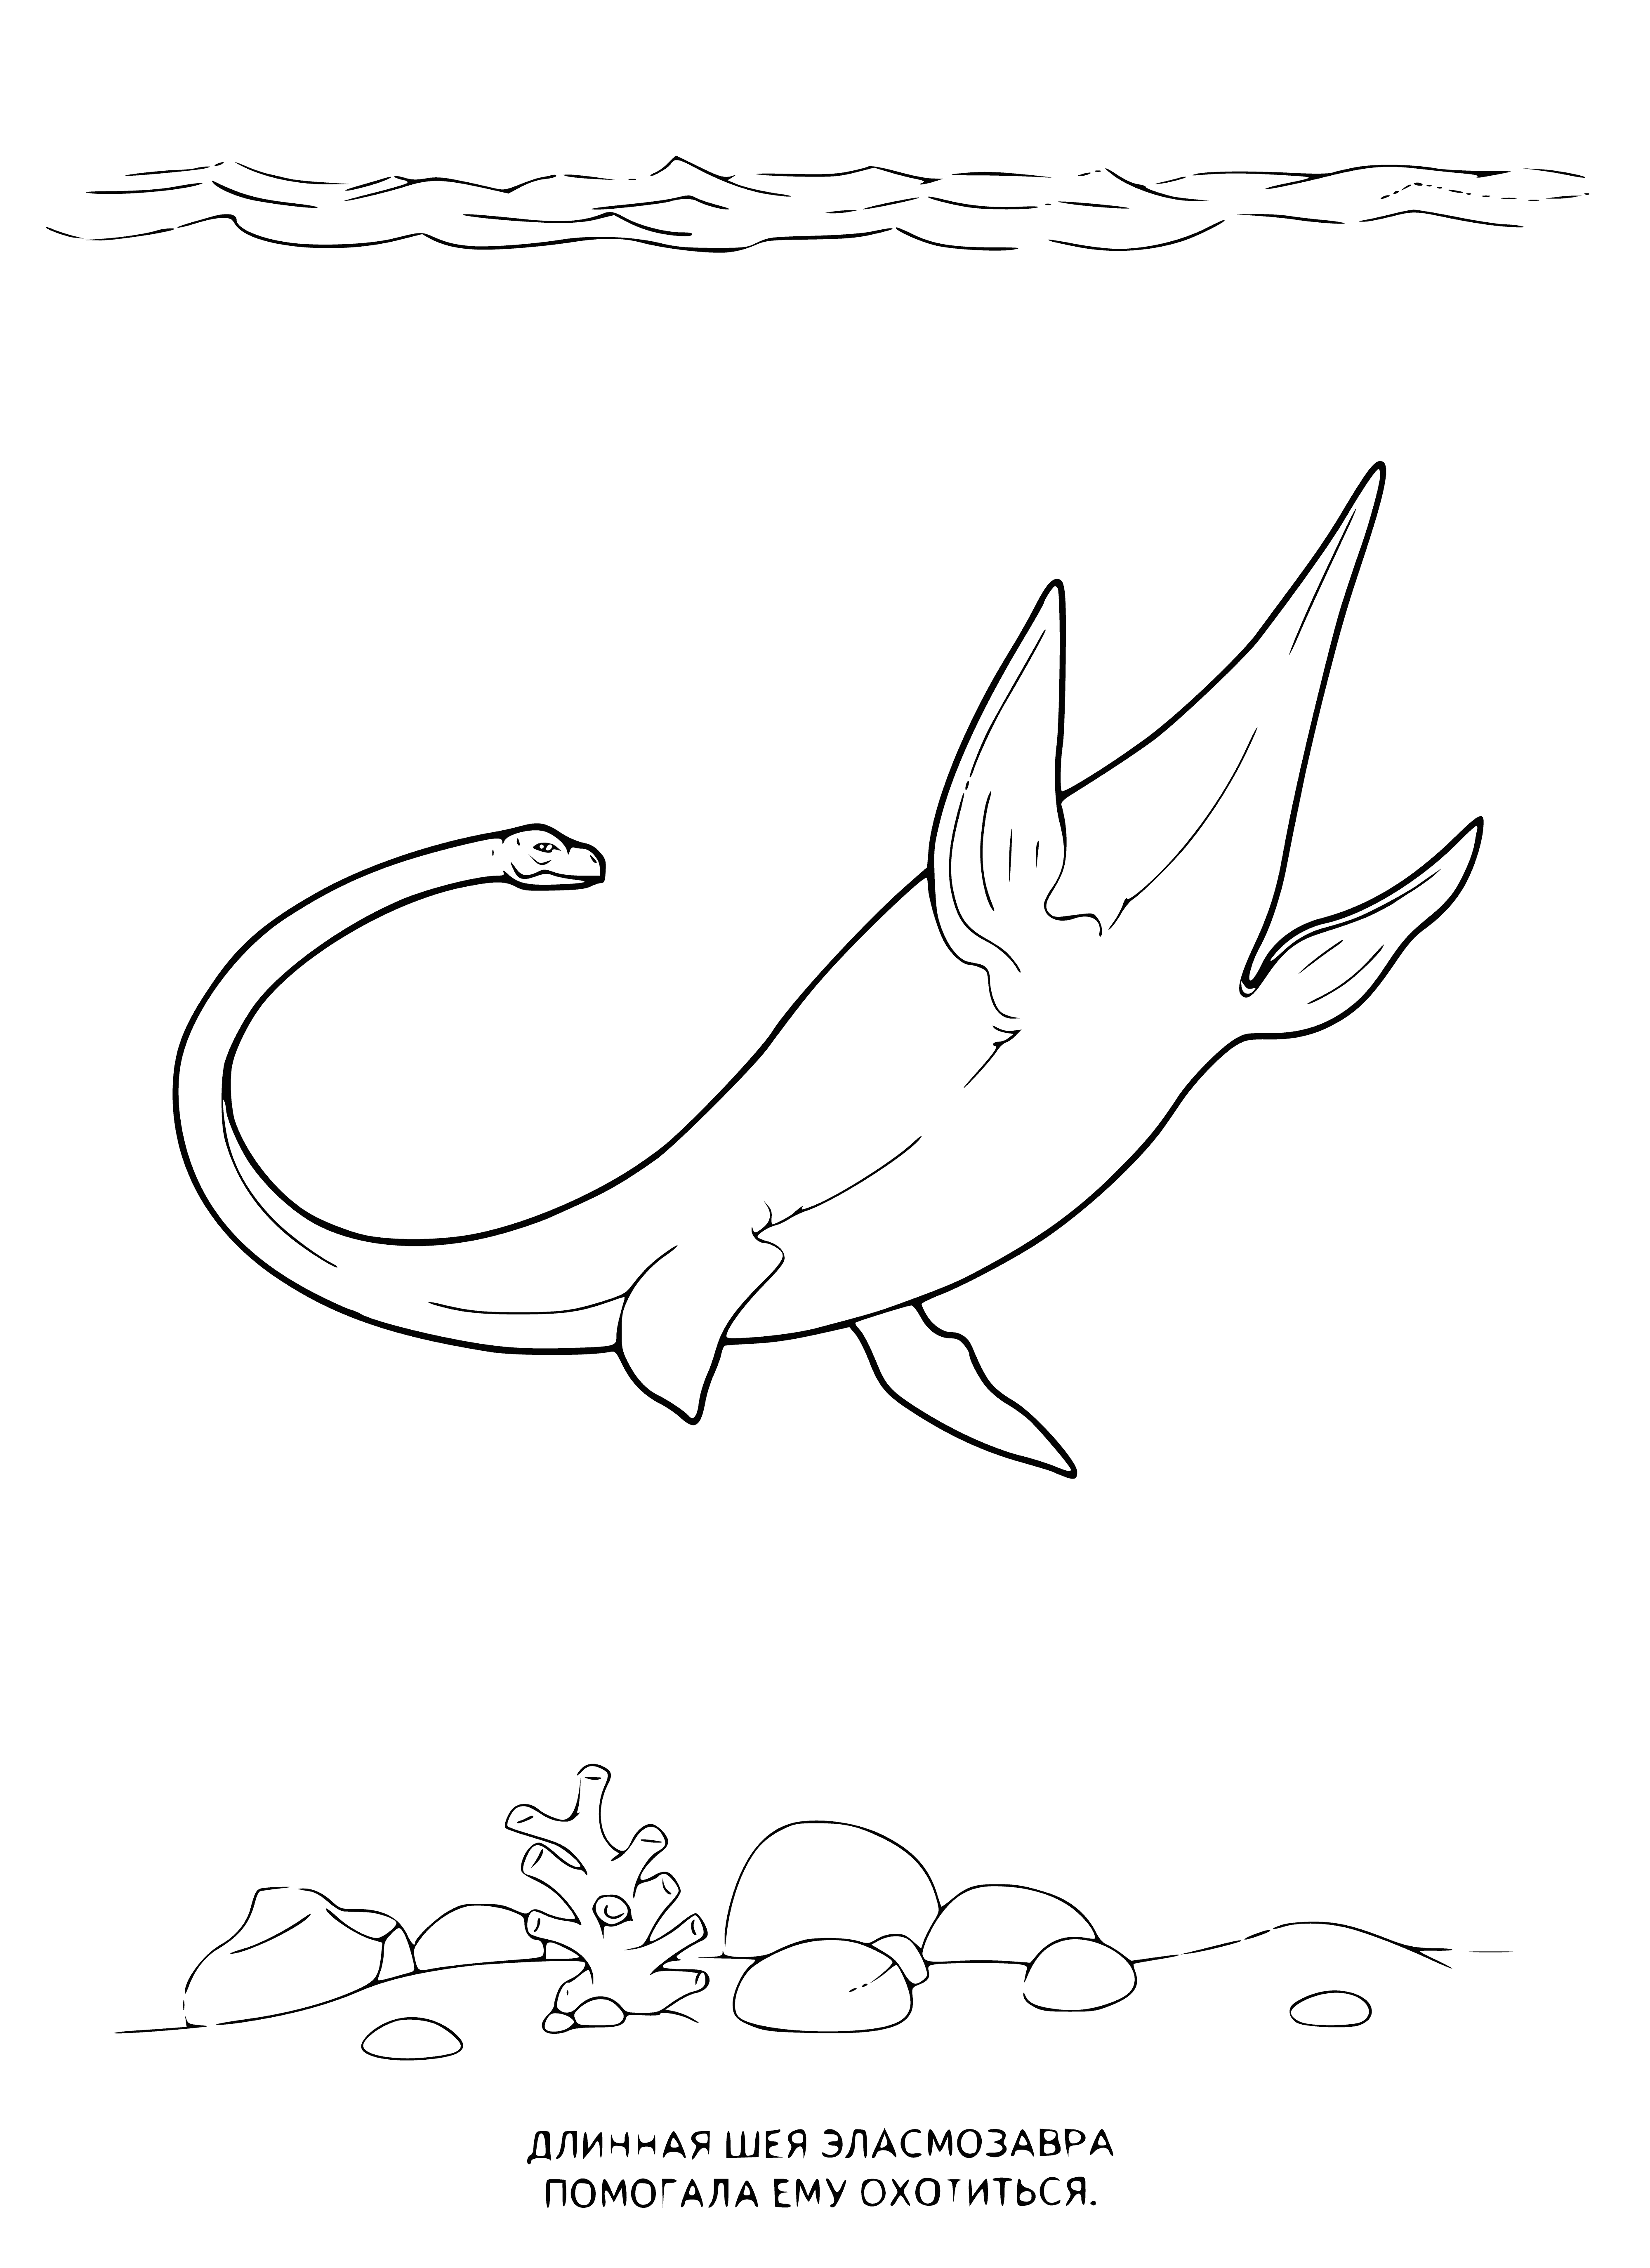 coloring page: Giant long-necked dino swimming with long tail; dark green body, bumpy protrusions, small blunt head, 3-fingered hands, webbed feet.